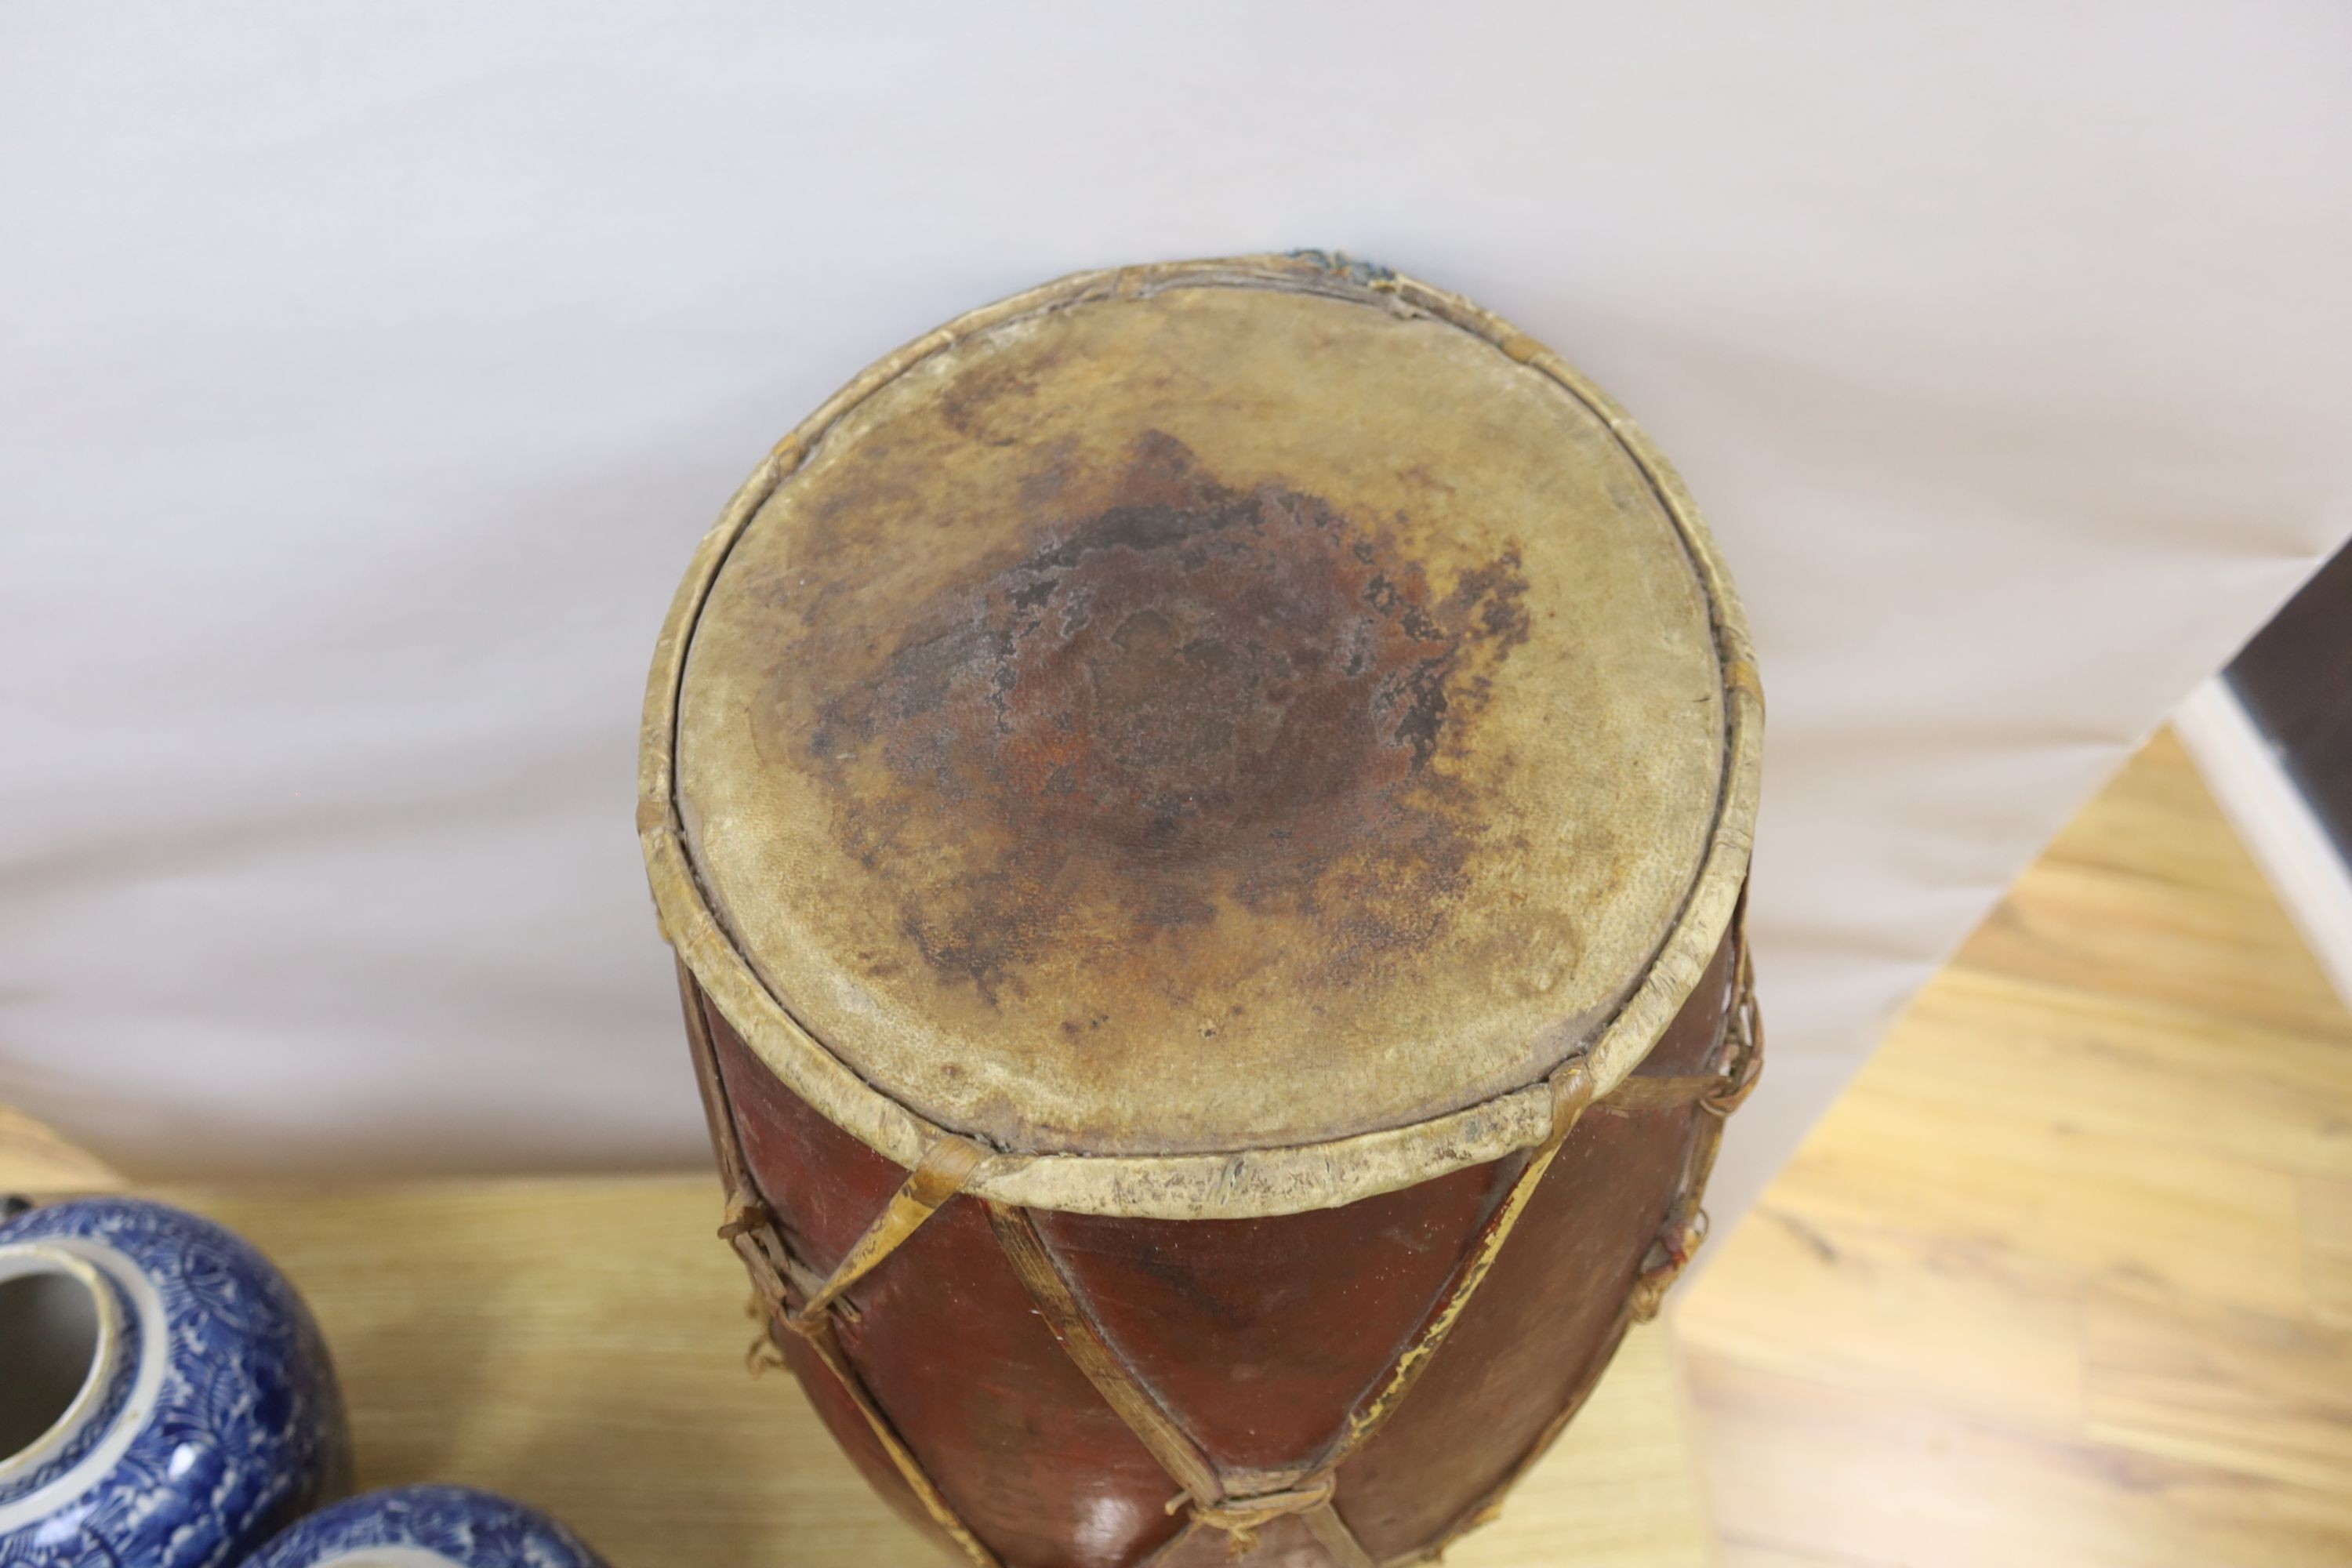 A tall tribal wooden drum, the vellum skins held by bamboo strapping and decorated in red and ochre - 62cm